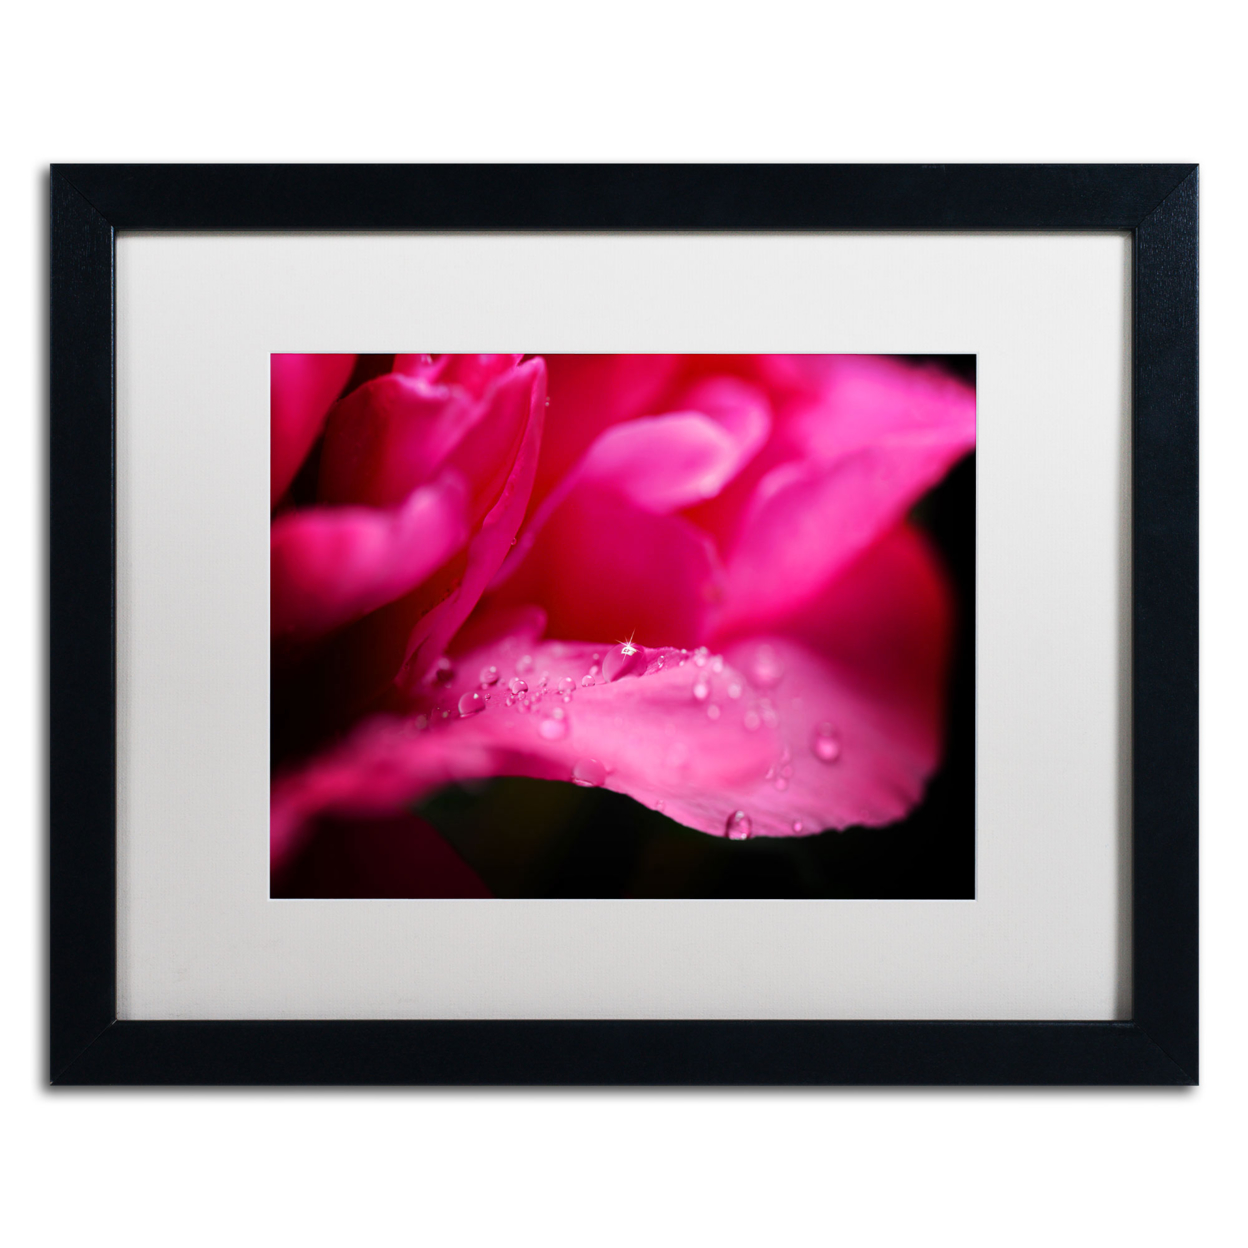 Philippe Sainte-Laudy 'Peony Drops' Black Wooden Framed Art 18 X 22 Inches